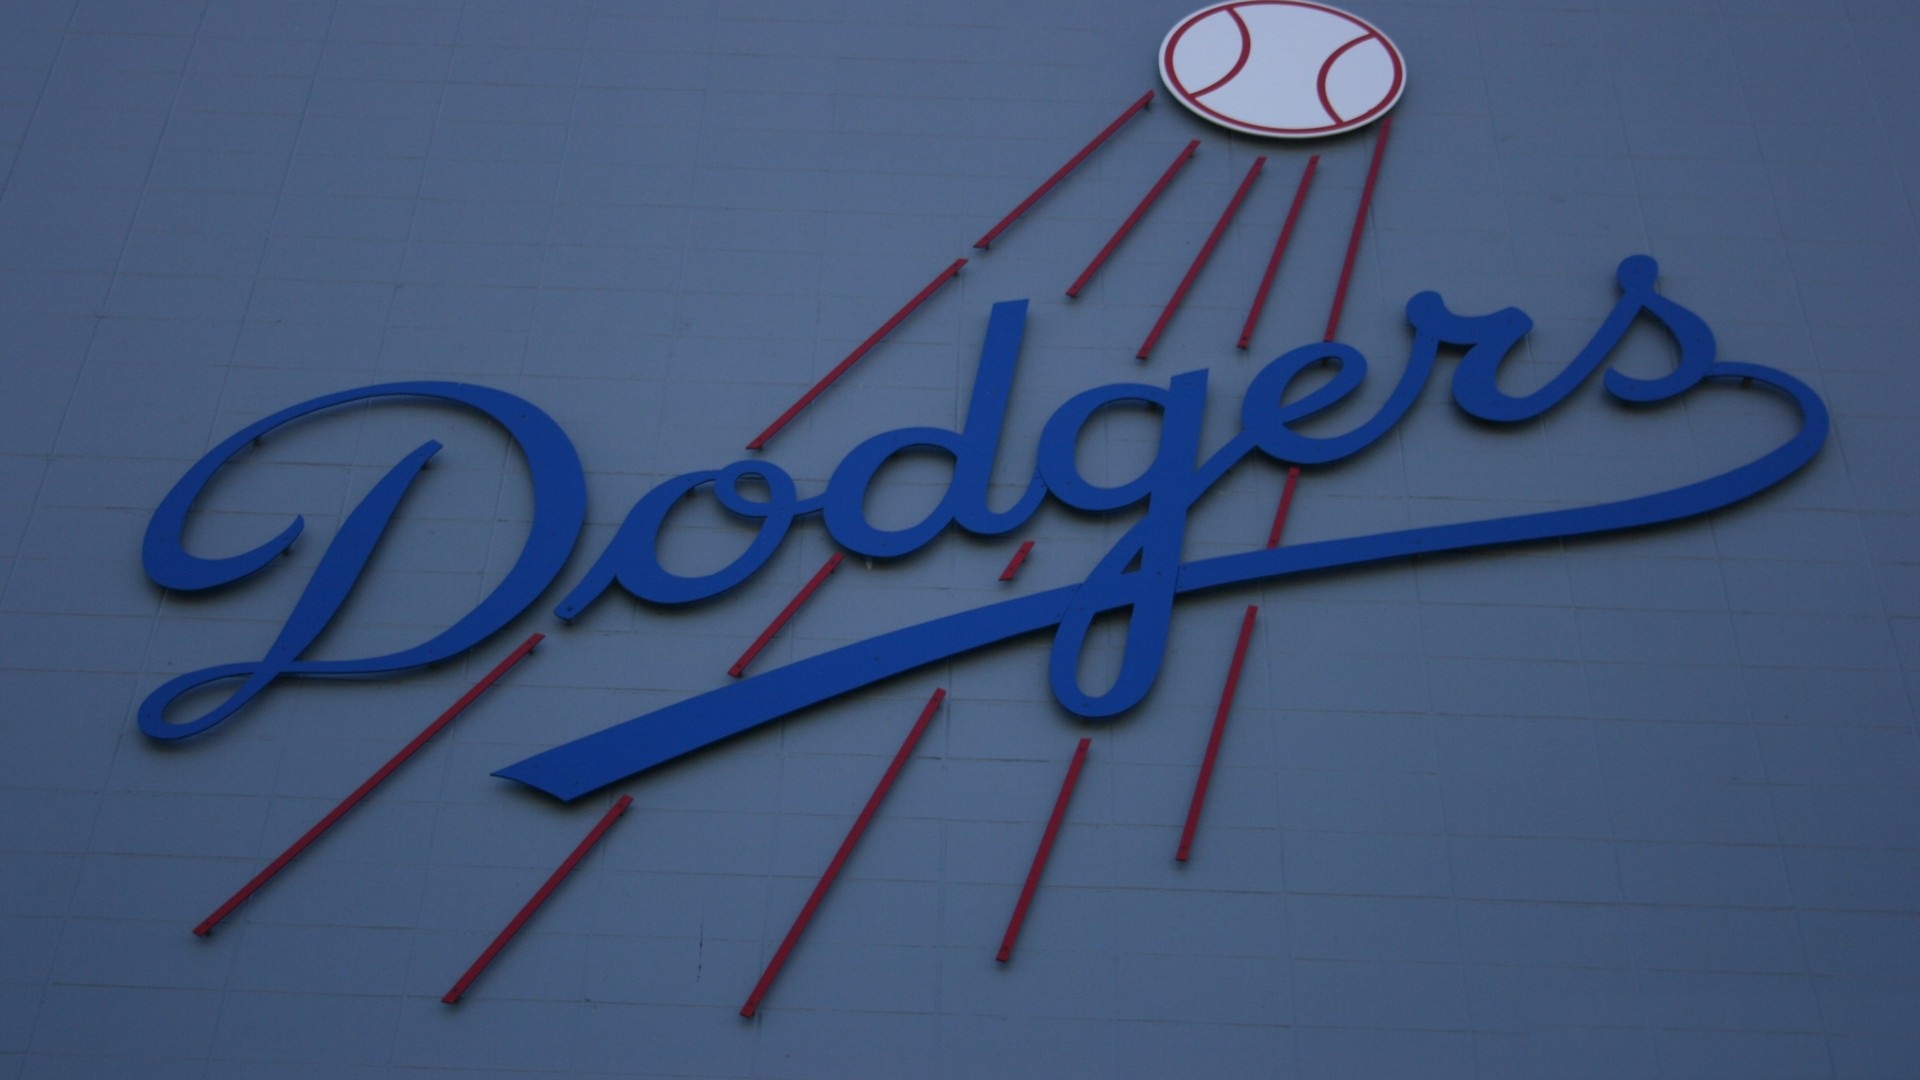 HD Desktop Wallpaper Los Angeles Dodgers with high-resolution 1920x1080 pixel. You can use this wallpaper for Mac Desktop Wallpaper, Laptop Screensavers, Android Wallpapers, Tablet or iPhone Home Screen and another mobile phone device